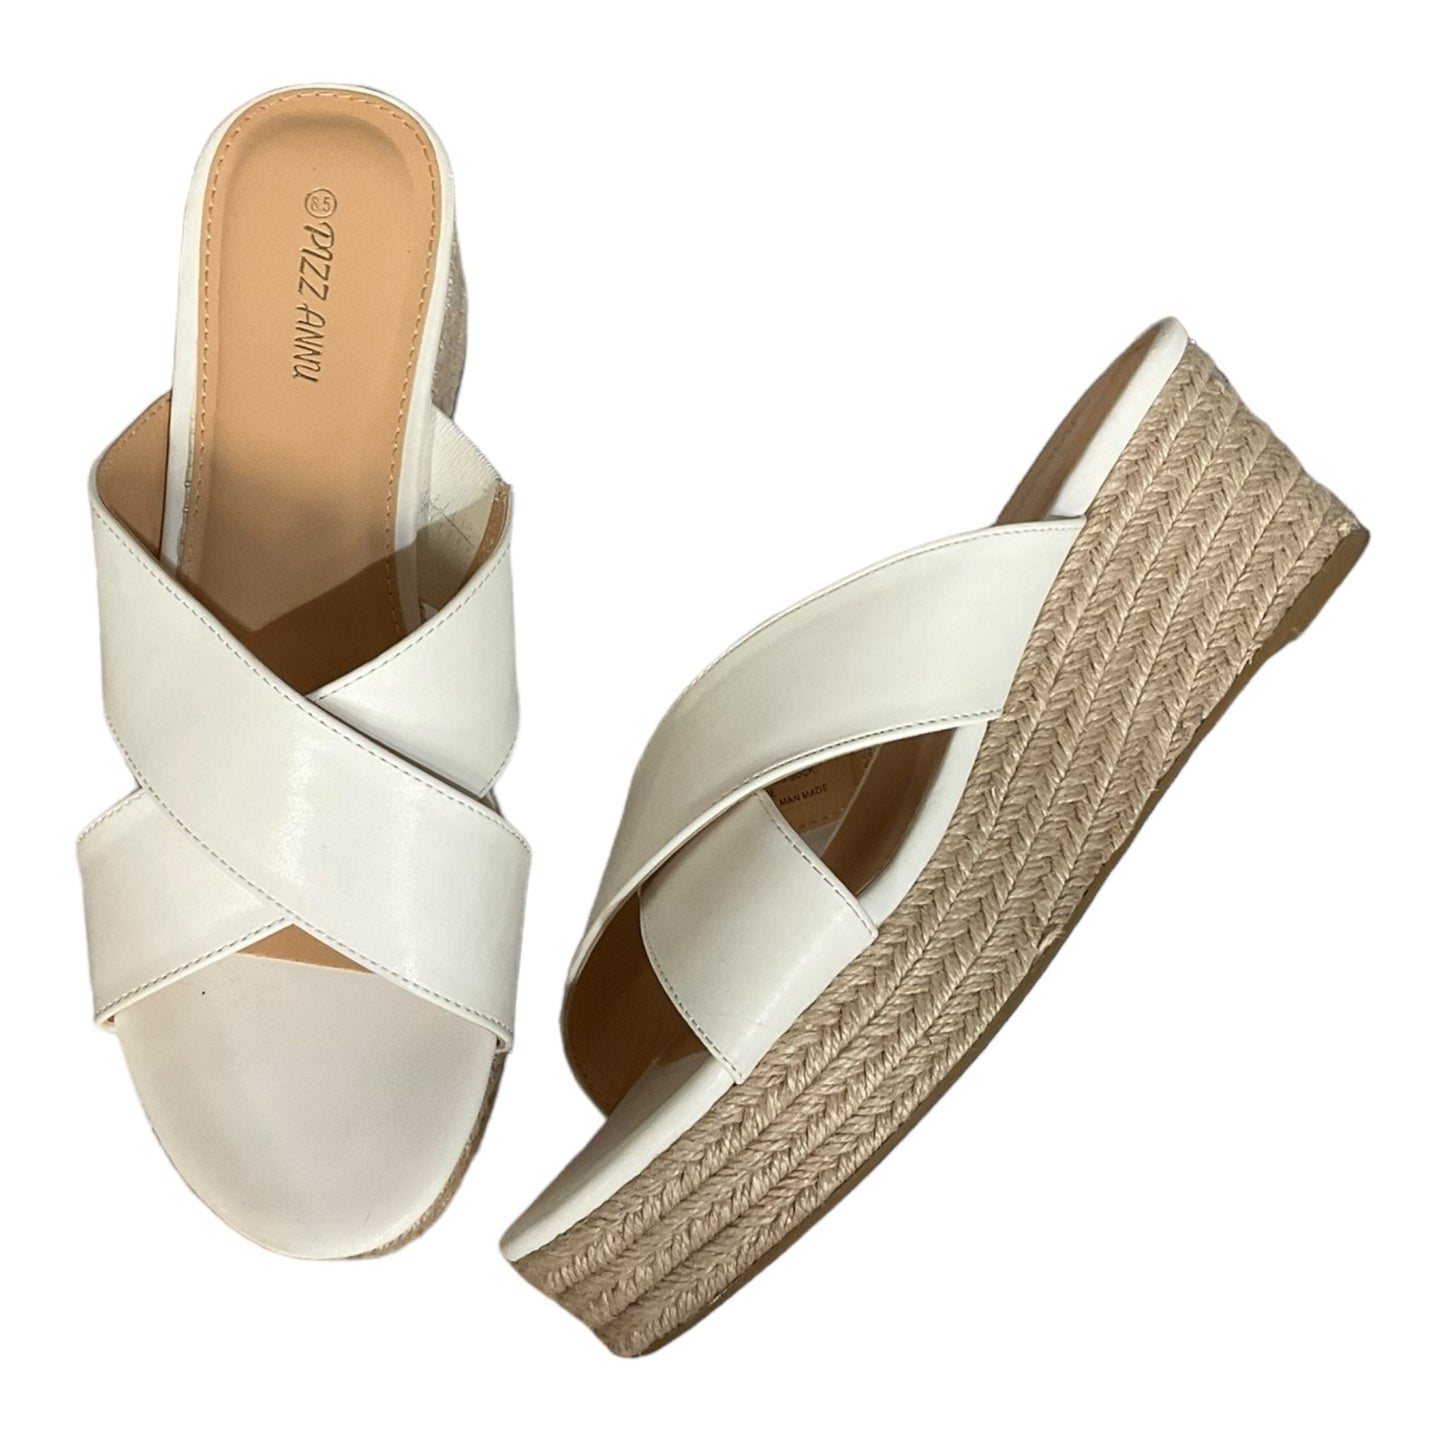 White Sandals Heels Wedge Cmb, Size 8.5